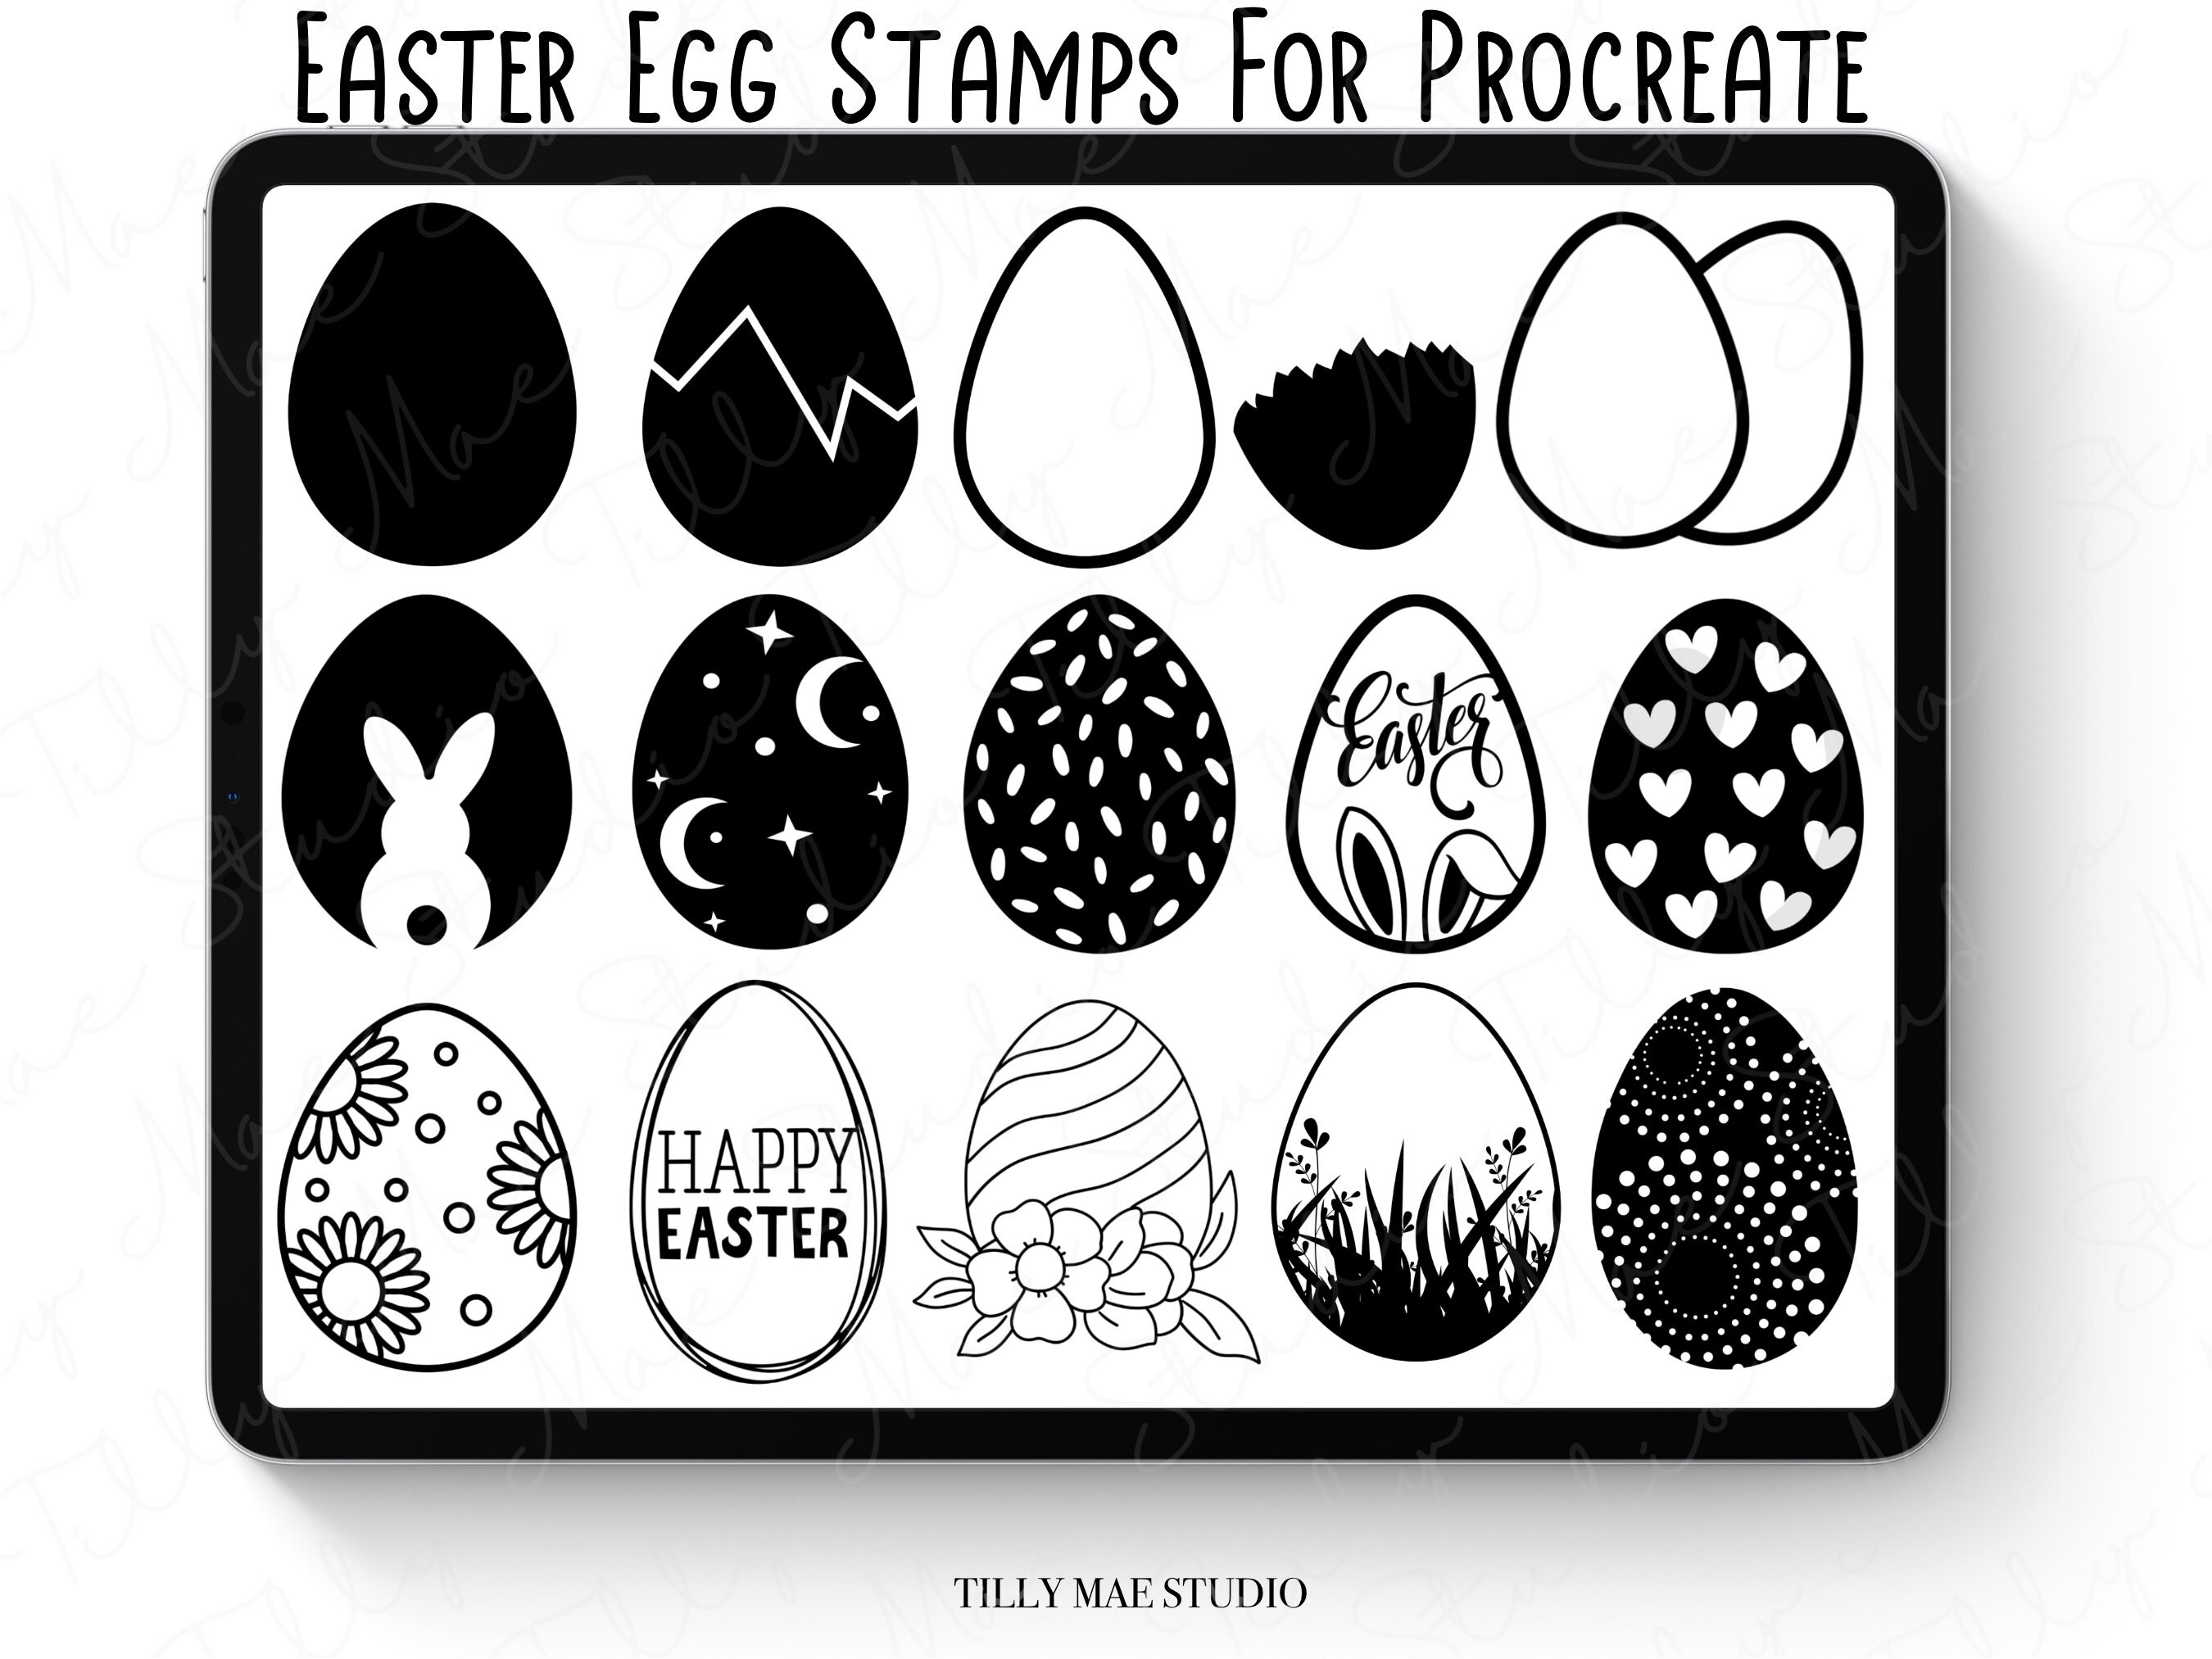 Procreate 22 Easter Egg Stamp Brushes Graphic by Sawanarod